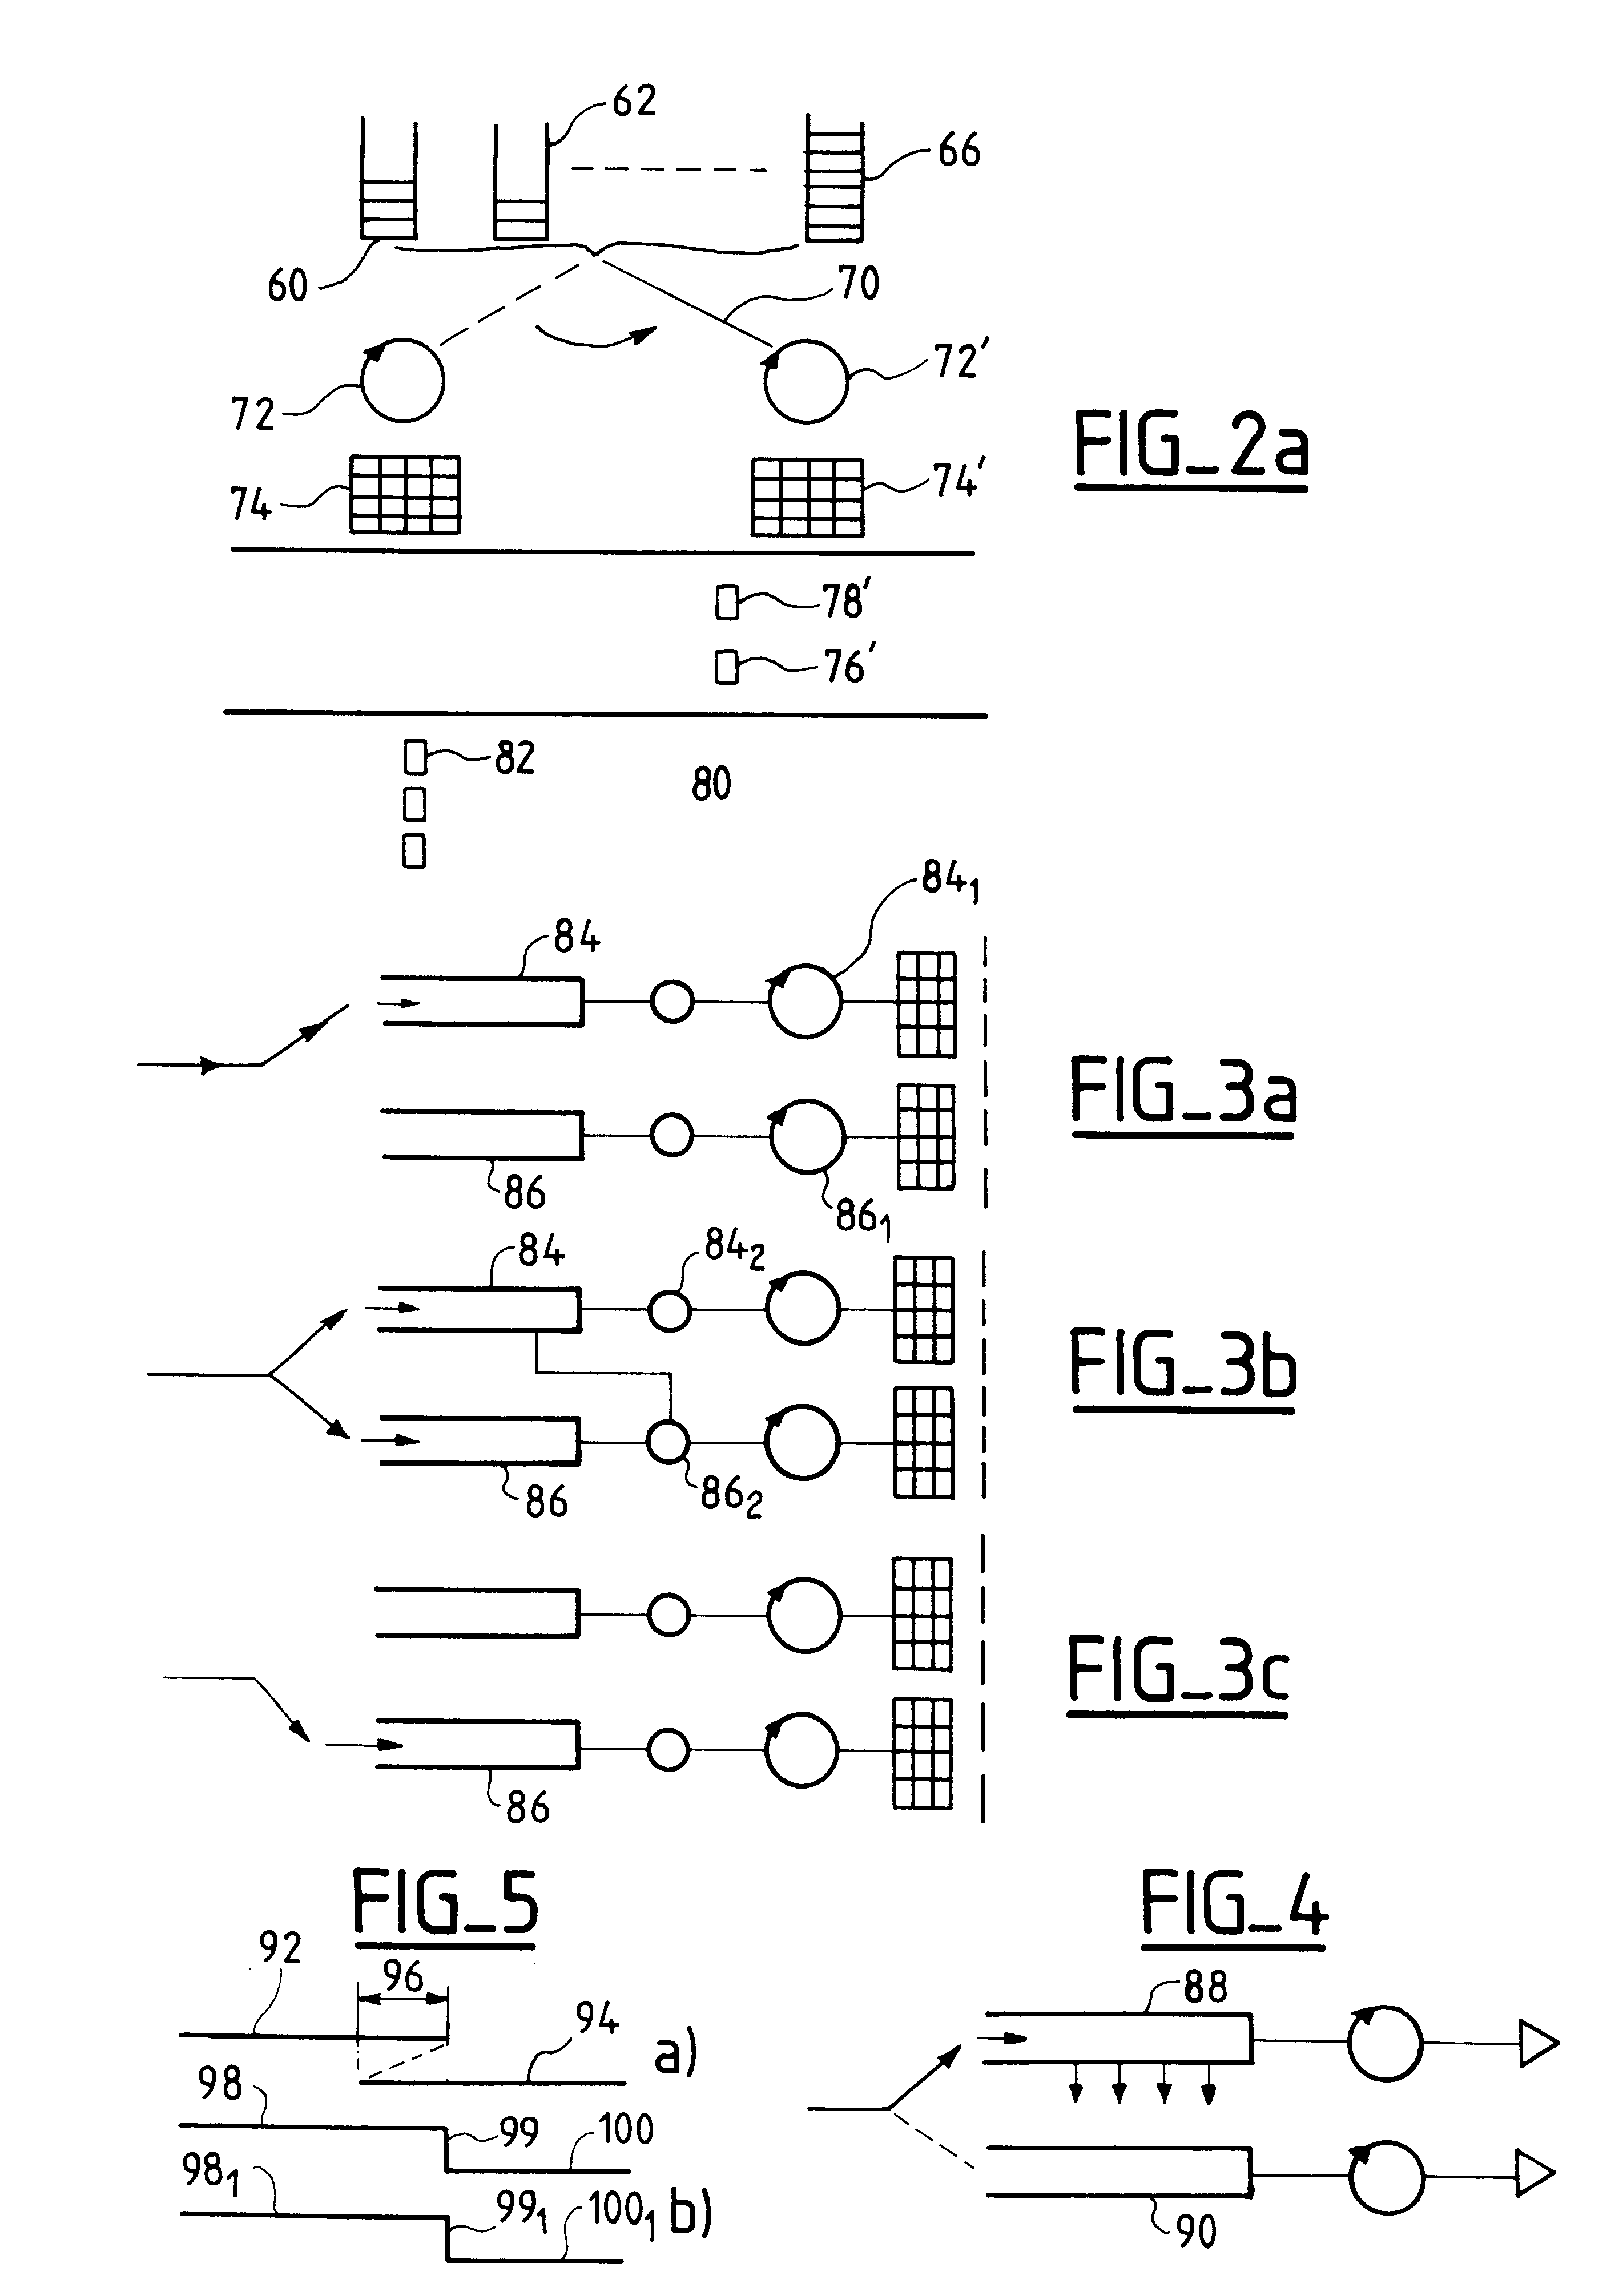 Packet mode telecommunications method and system in which calls can be handed over from one path to another